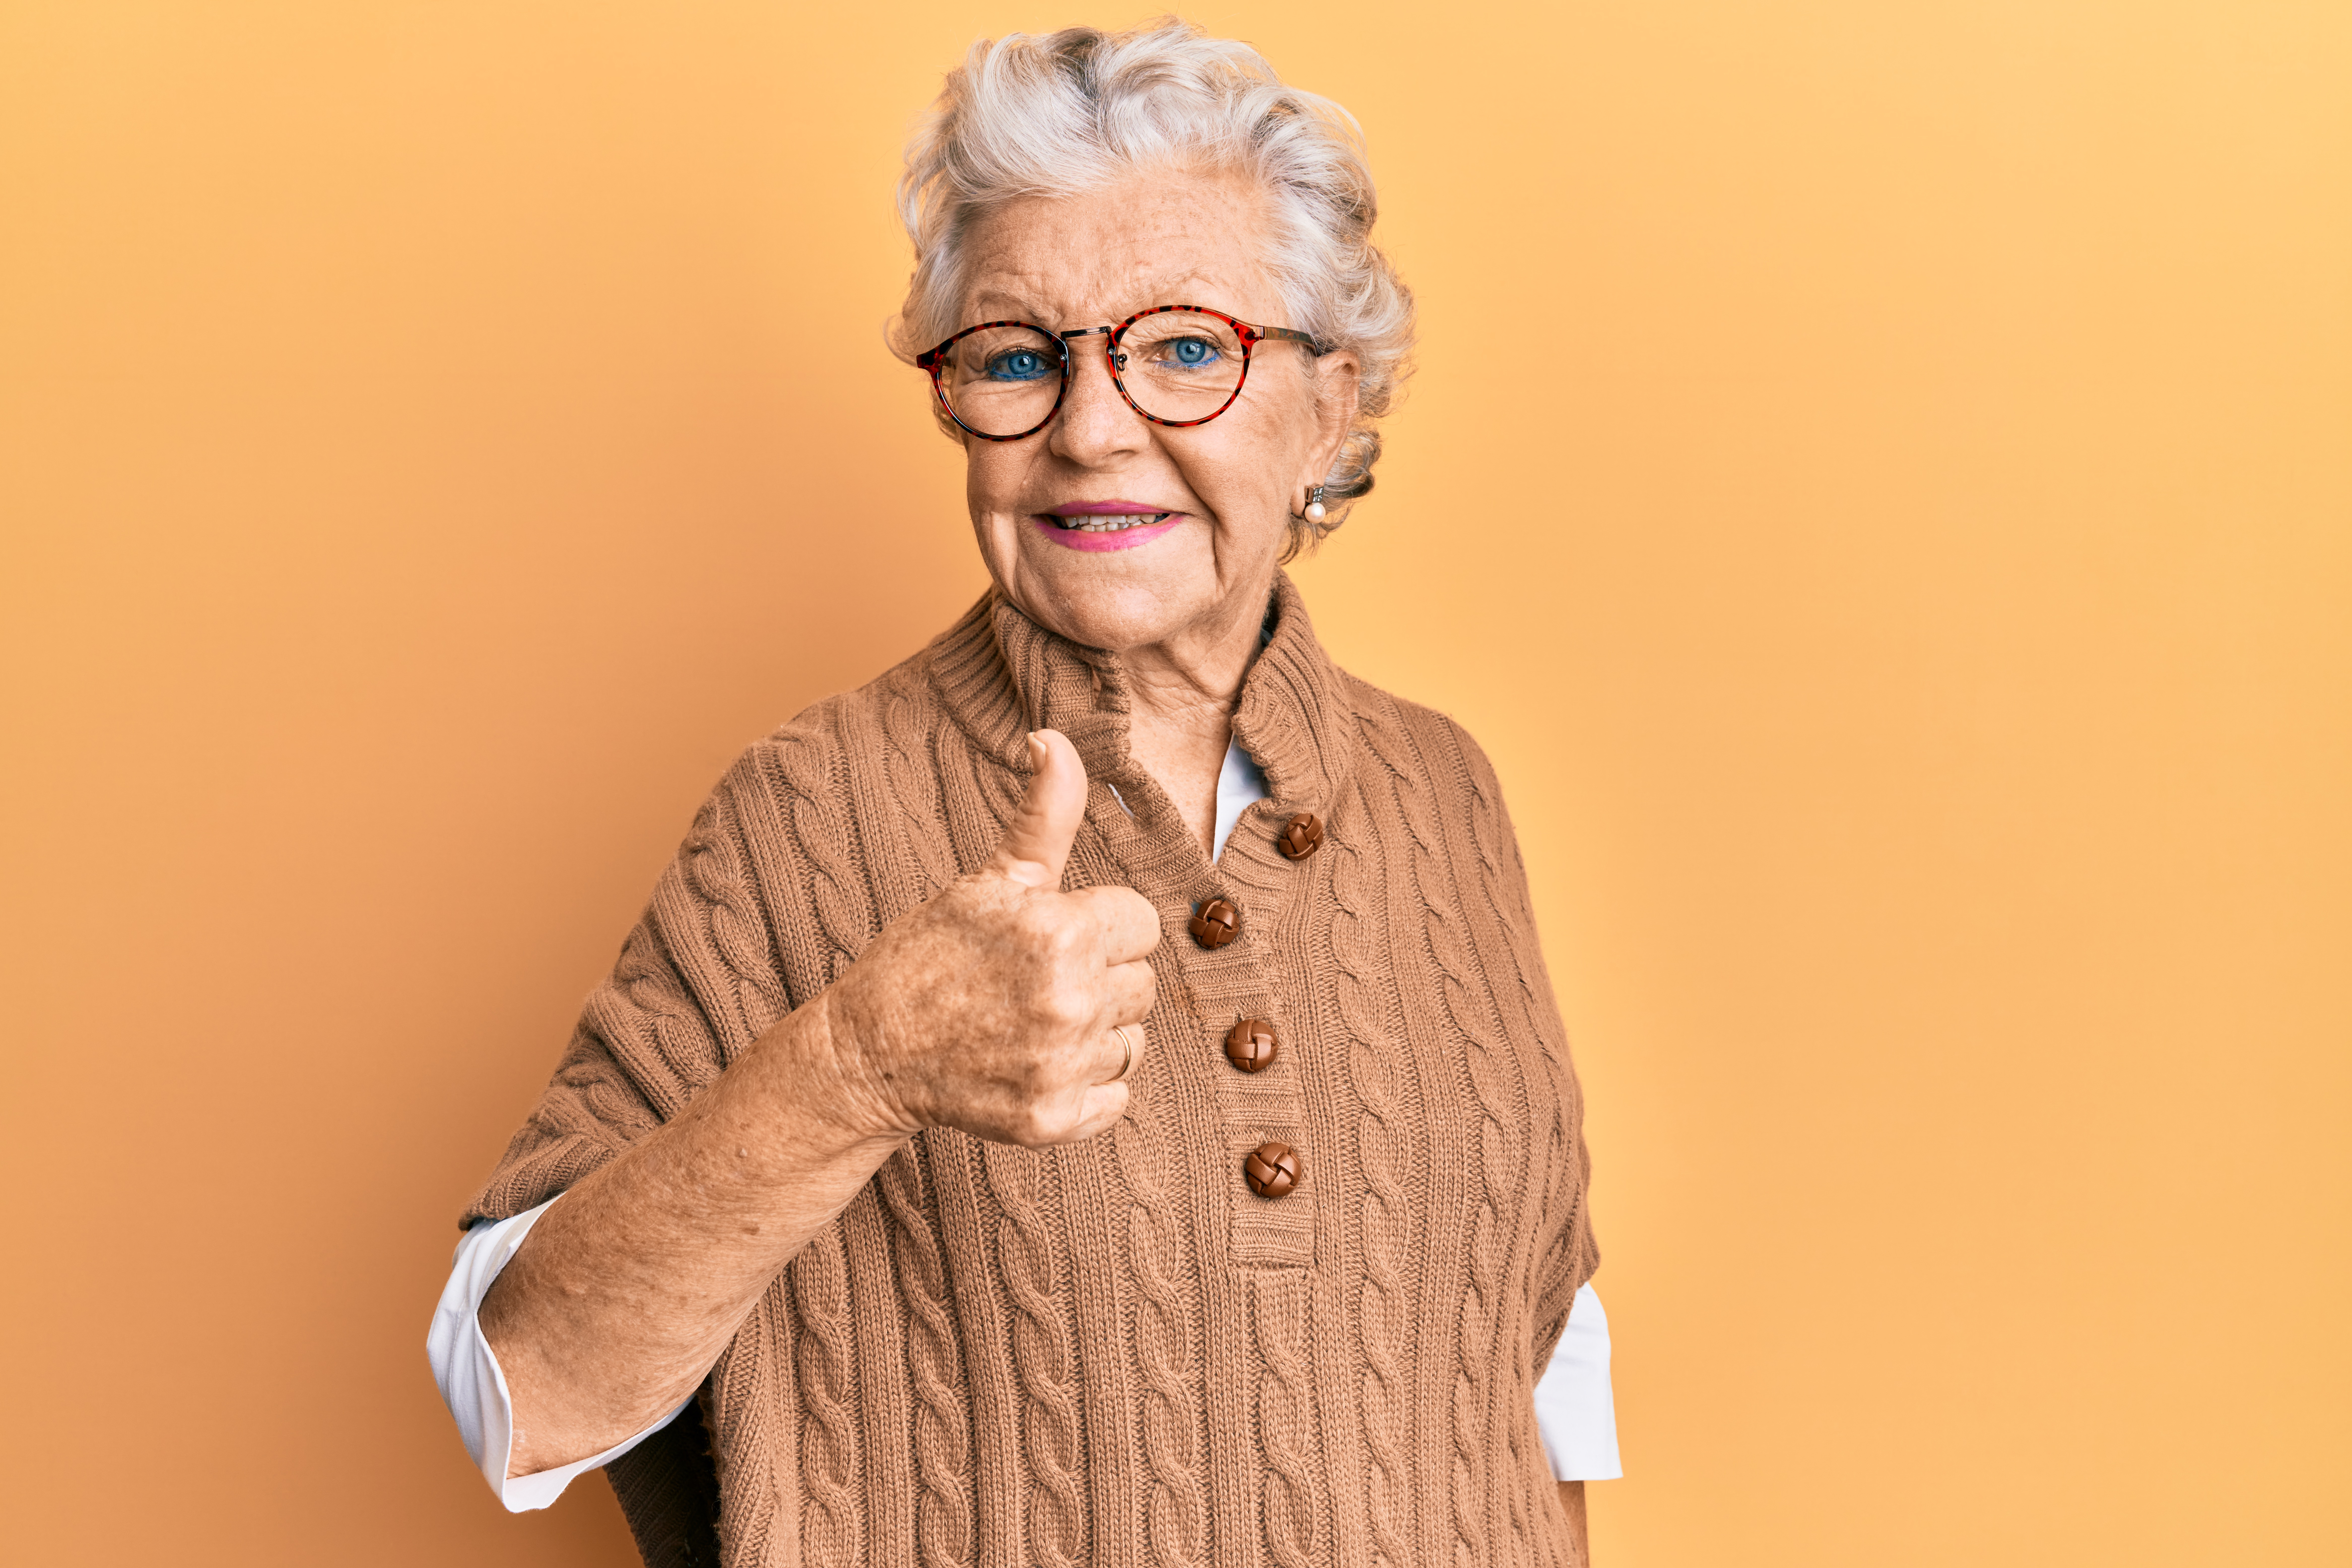 A happy grandmother doing thumbs up | Source: Shutterstock